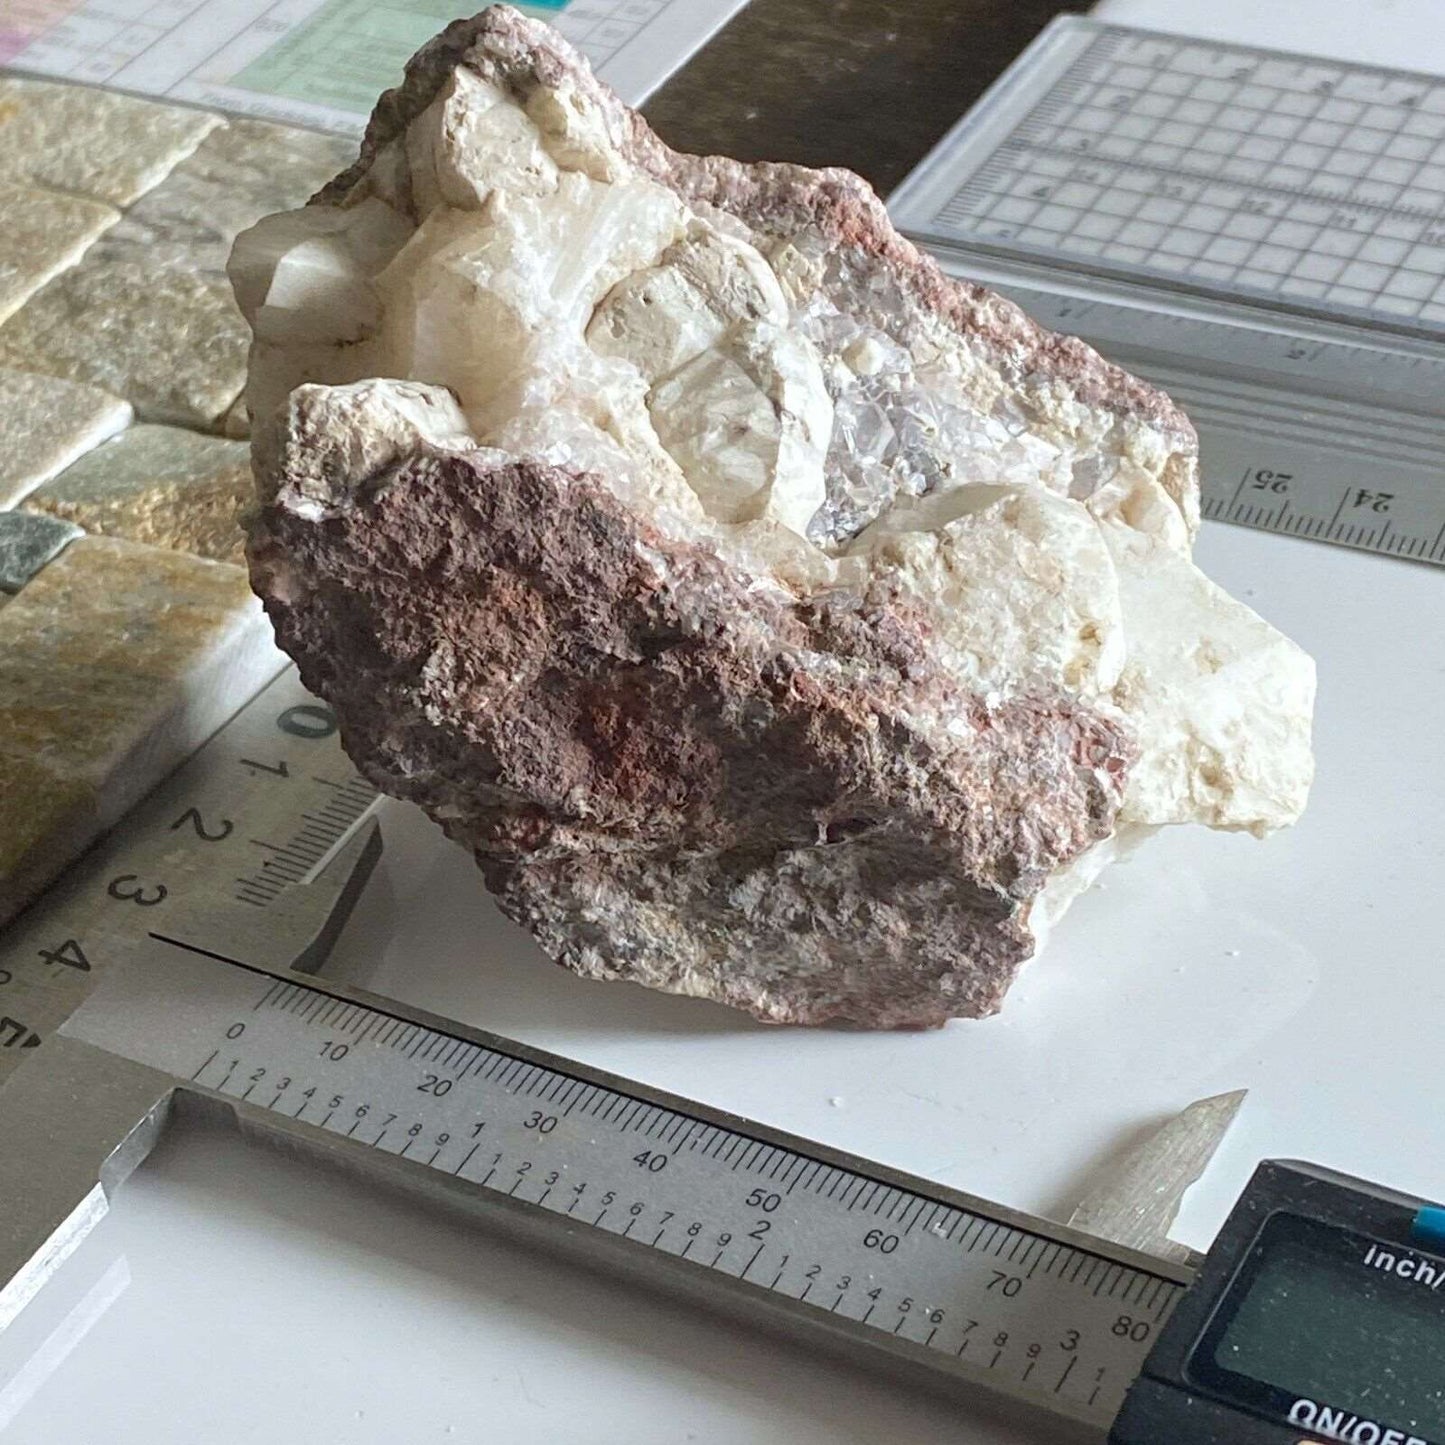 ANALCIME WITH RHODOCHROSITE ETC FROM QUEBEC, CANADA  254g MF6624